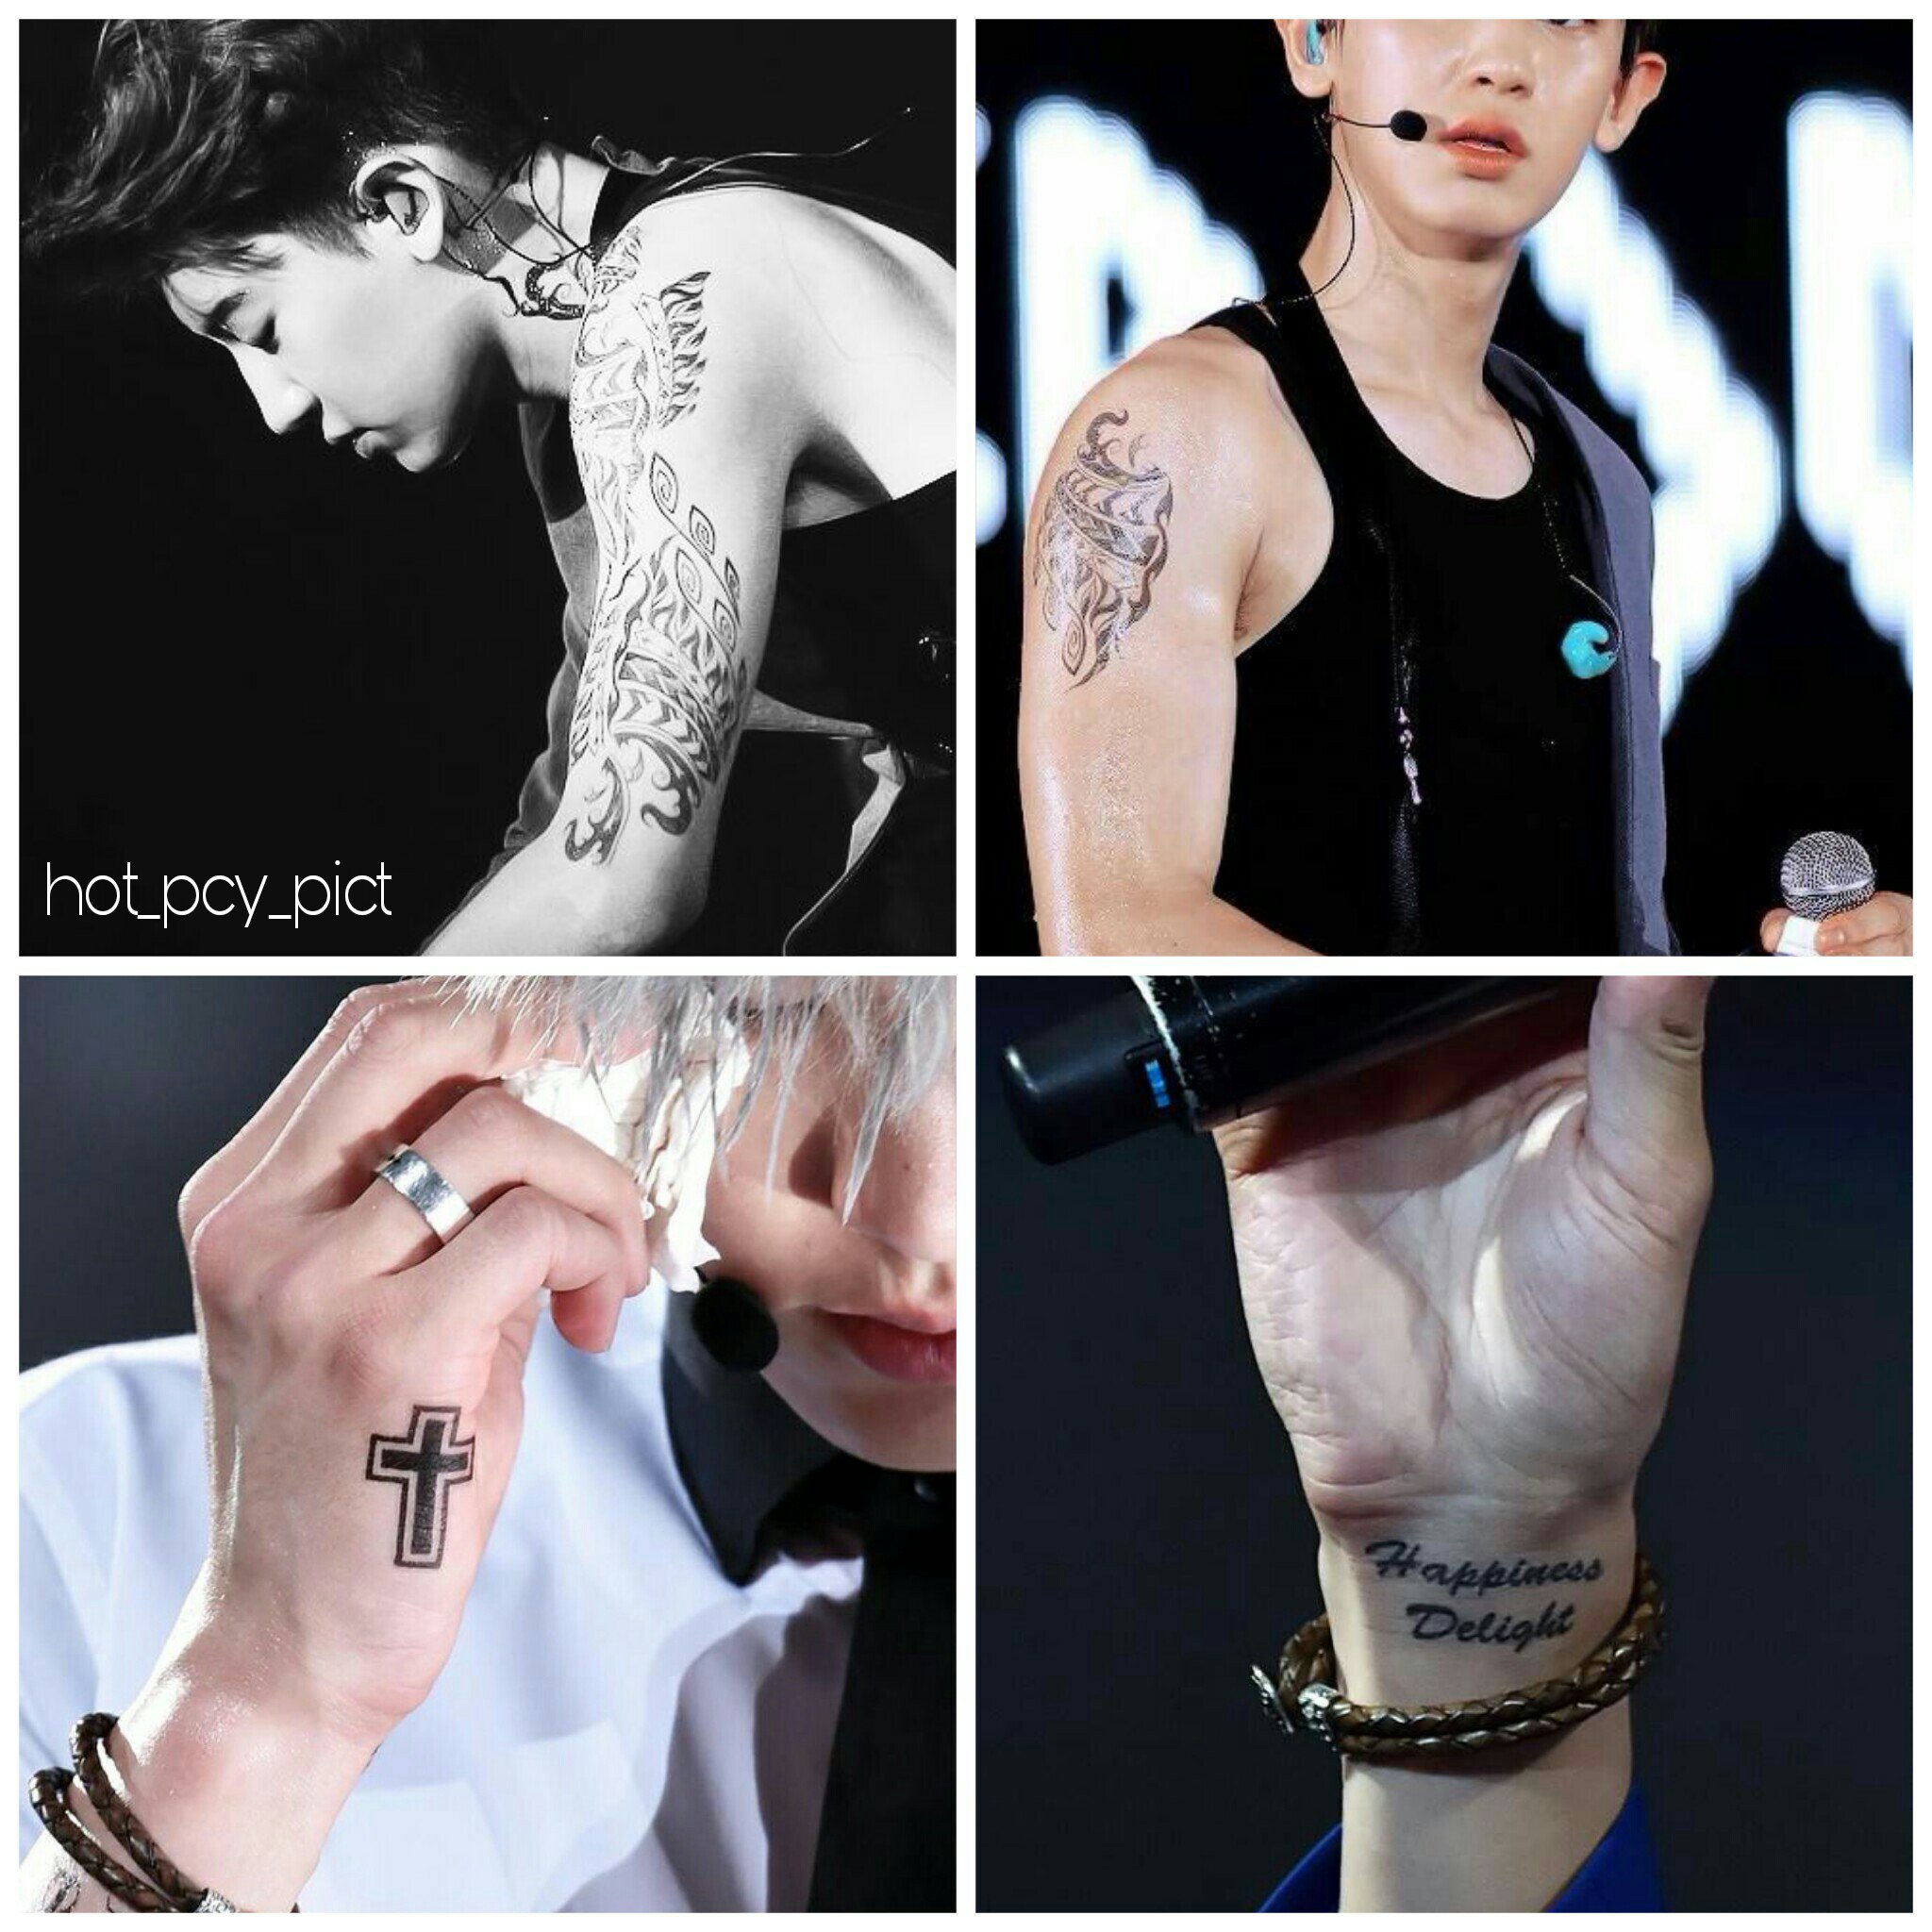 “chanyeol's tattoo from 2014 ➡ 2017” .